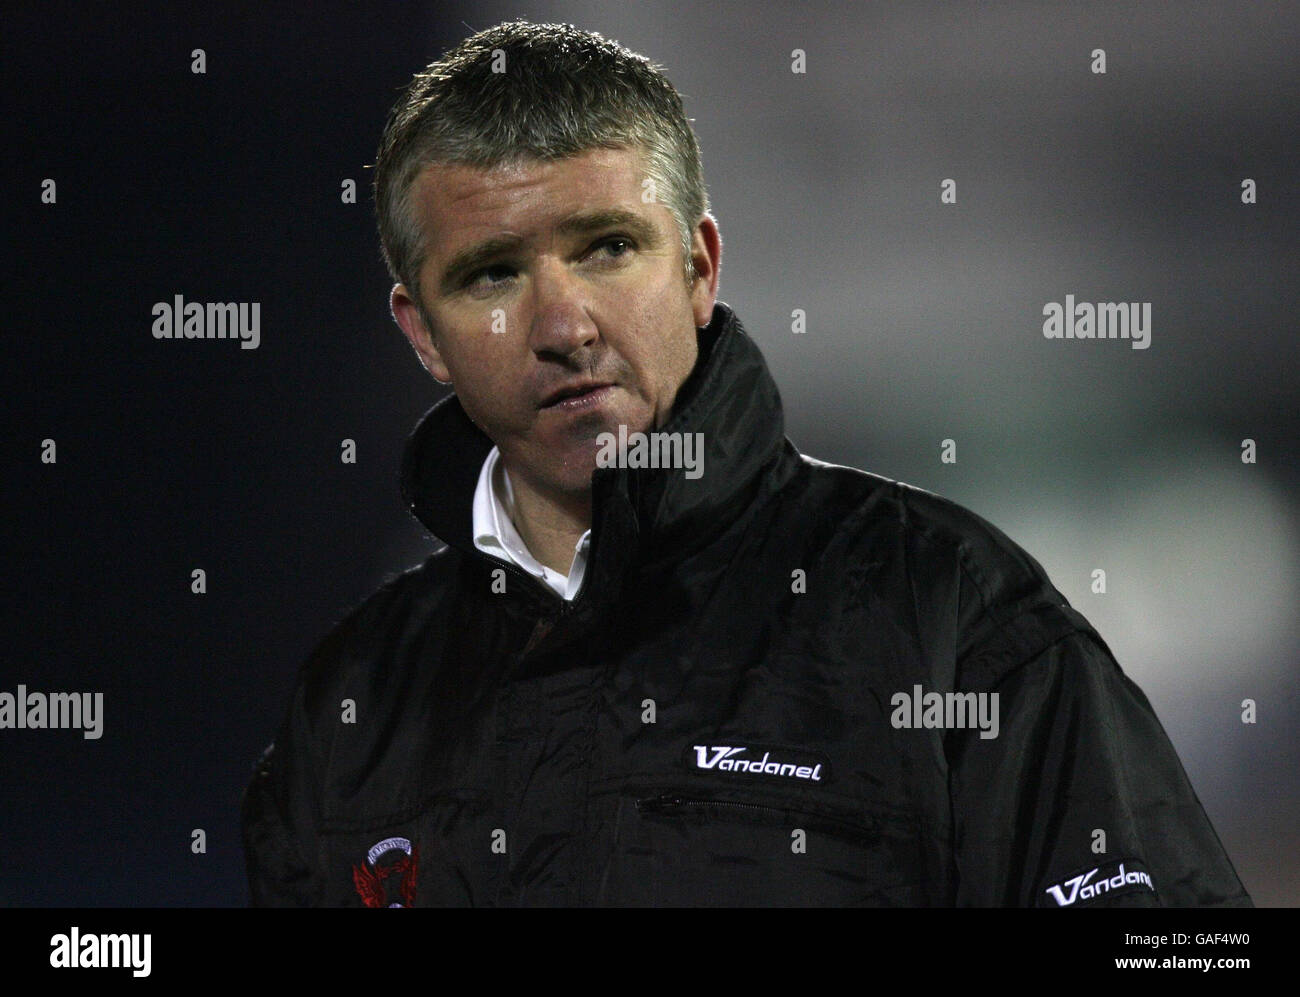 Leyton Orient's manager Martin Ling looks dejected during the Coca-Cola League One match at Brunton Park, Carlisle. Stock Photo